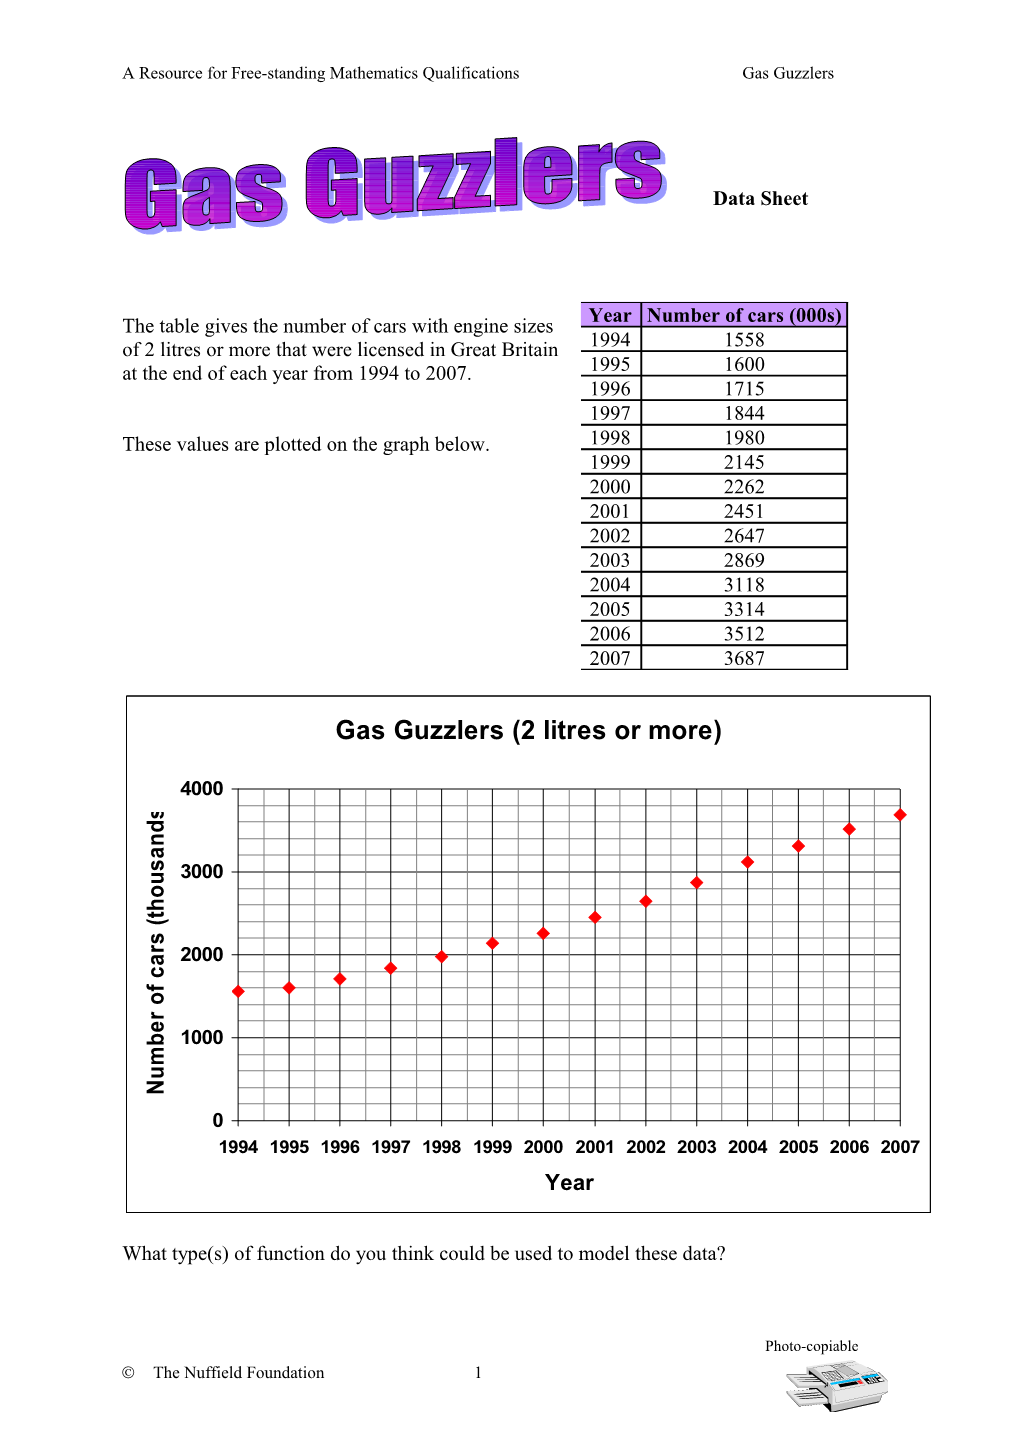 A Resource for Free-Standing Mathematics Qualificationsgas Guzzlers